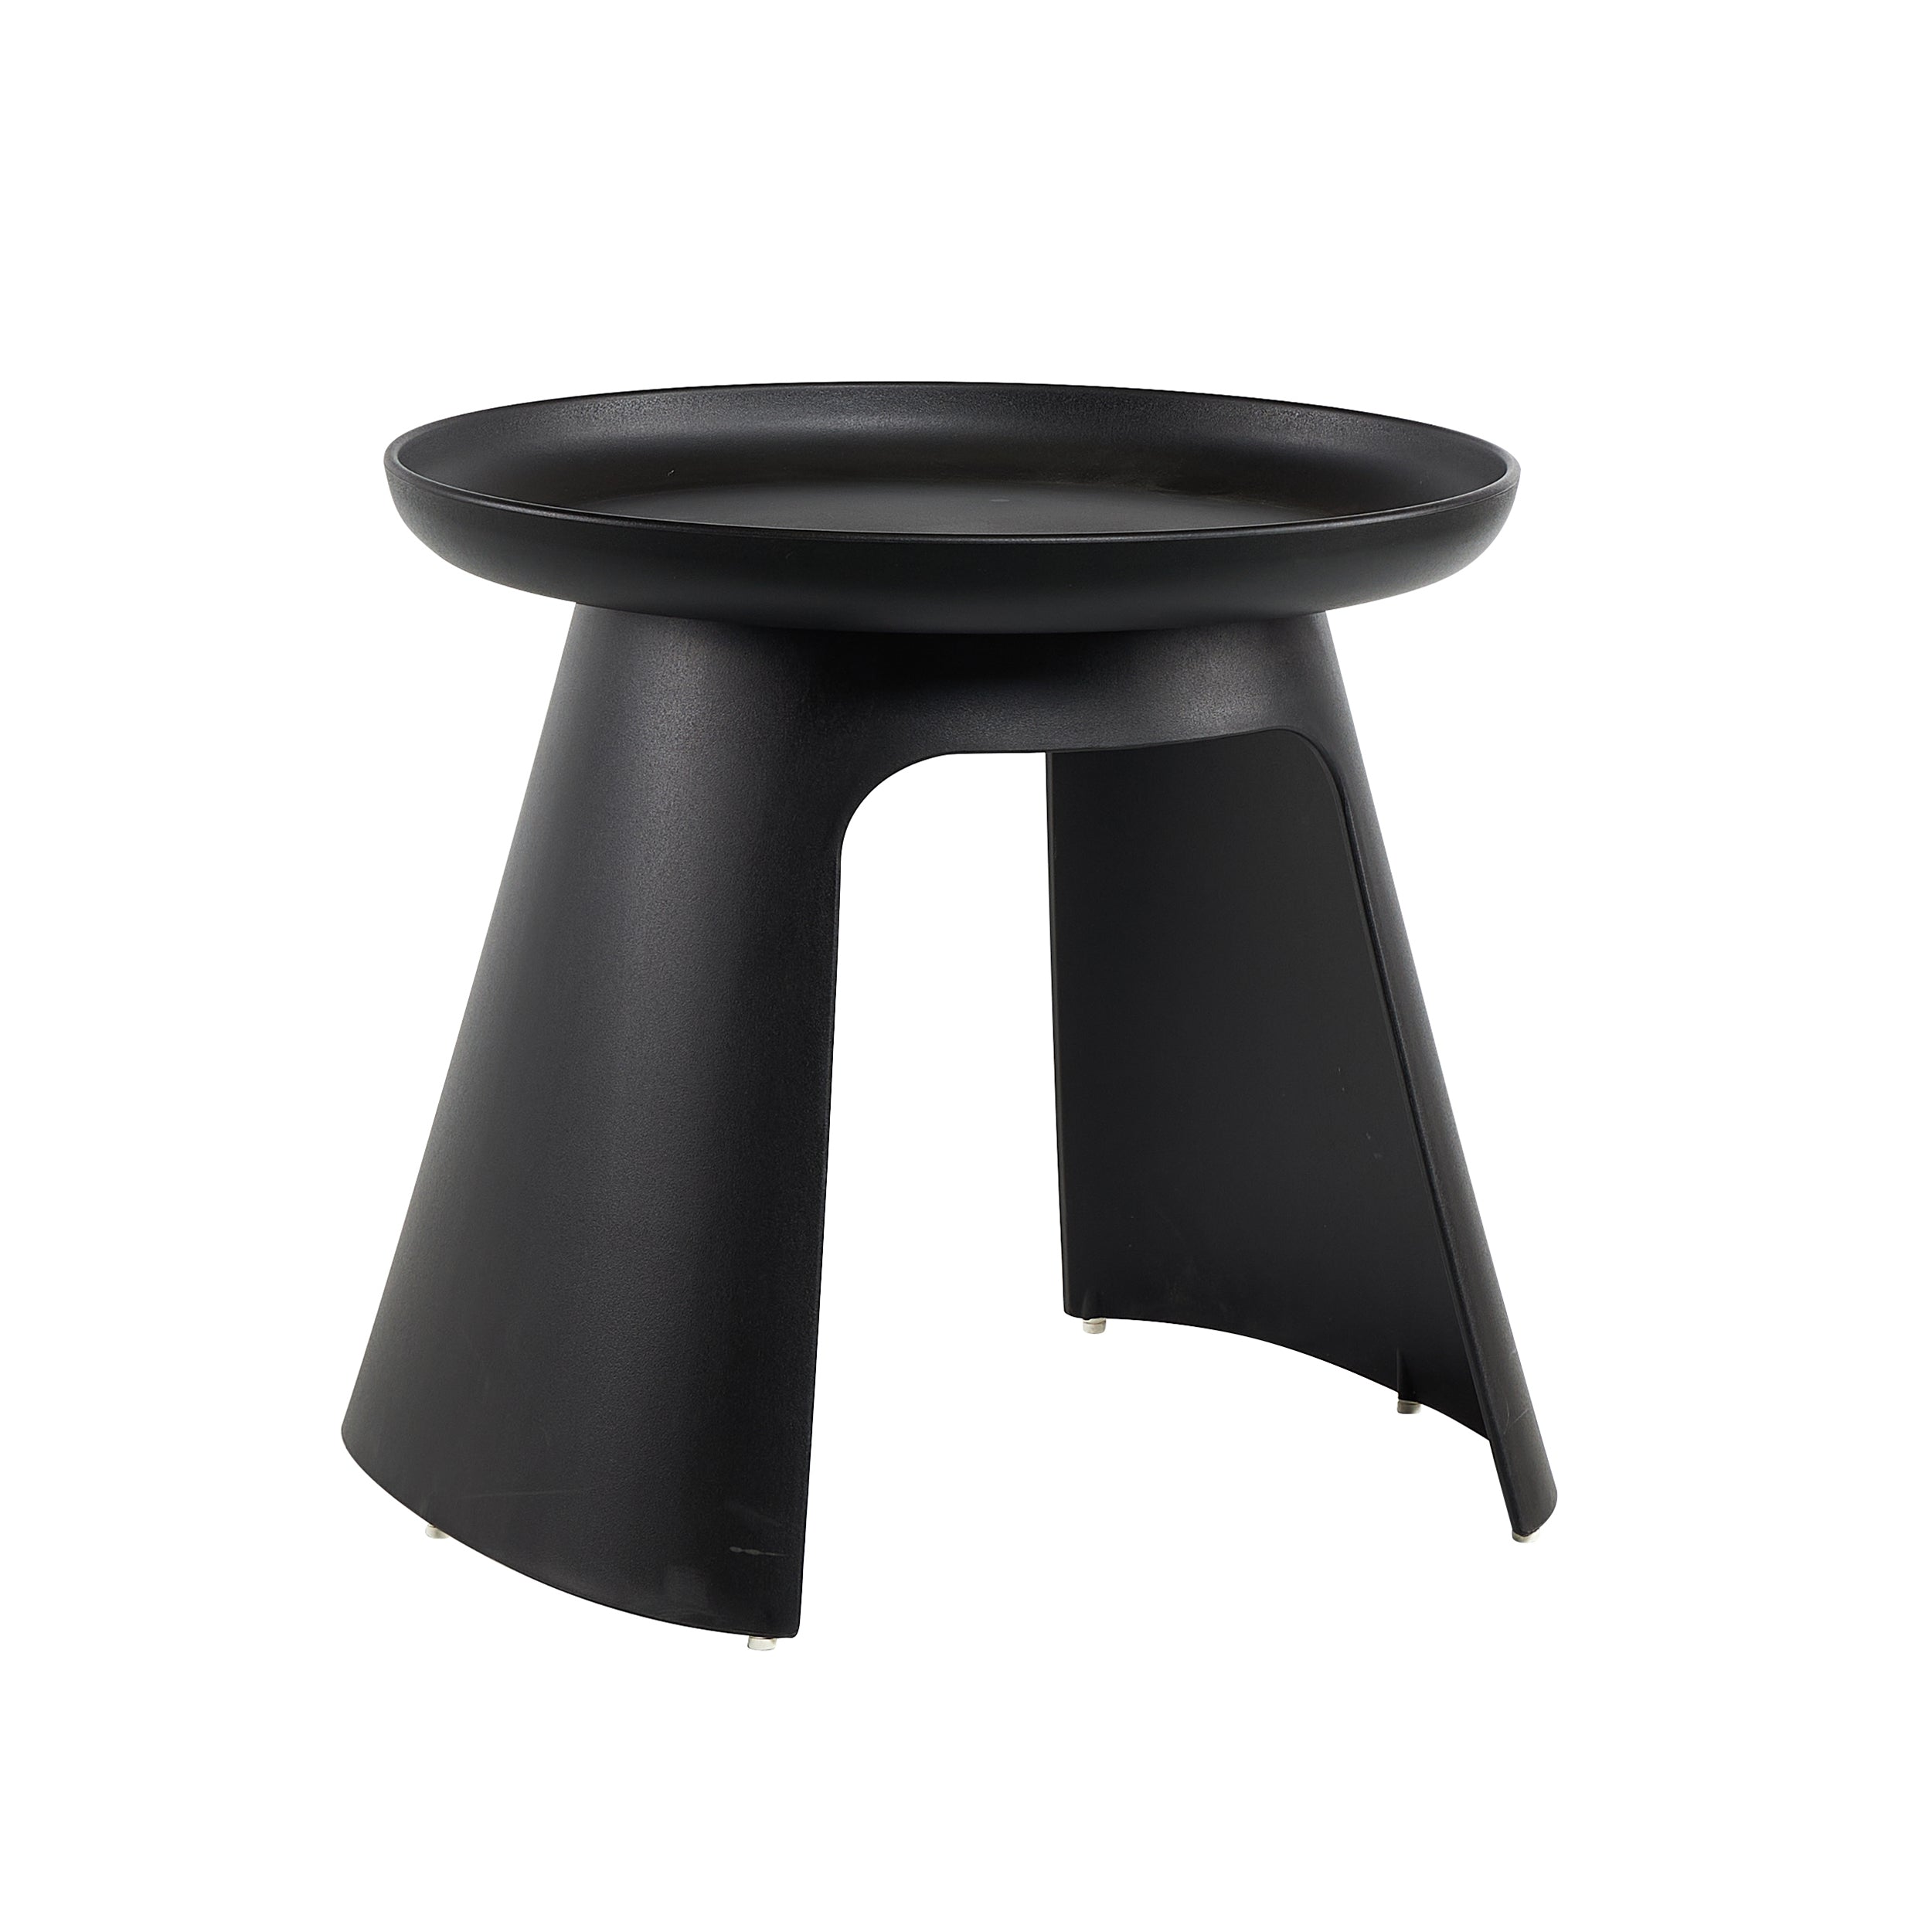 Ted Coffee Table - Black